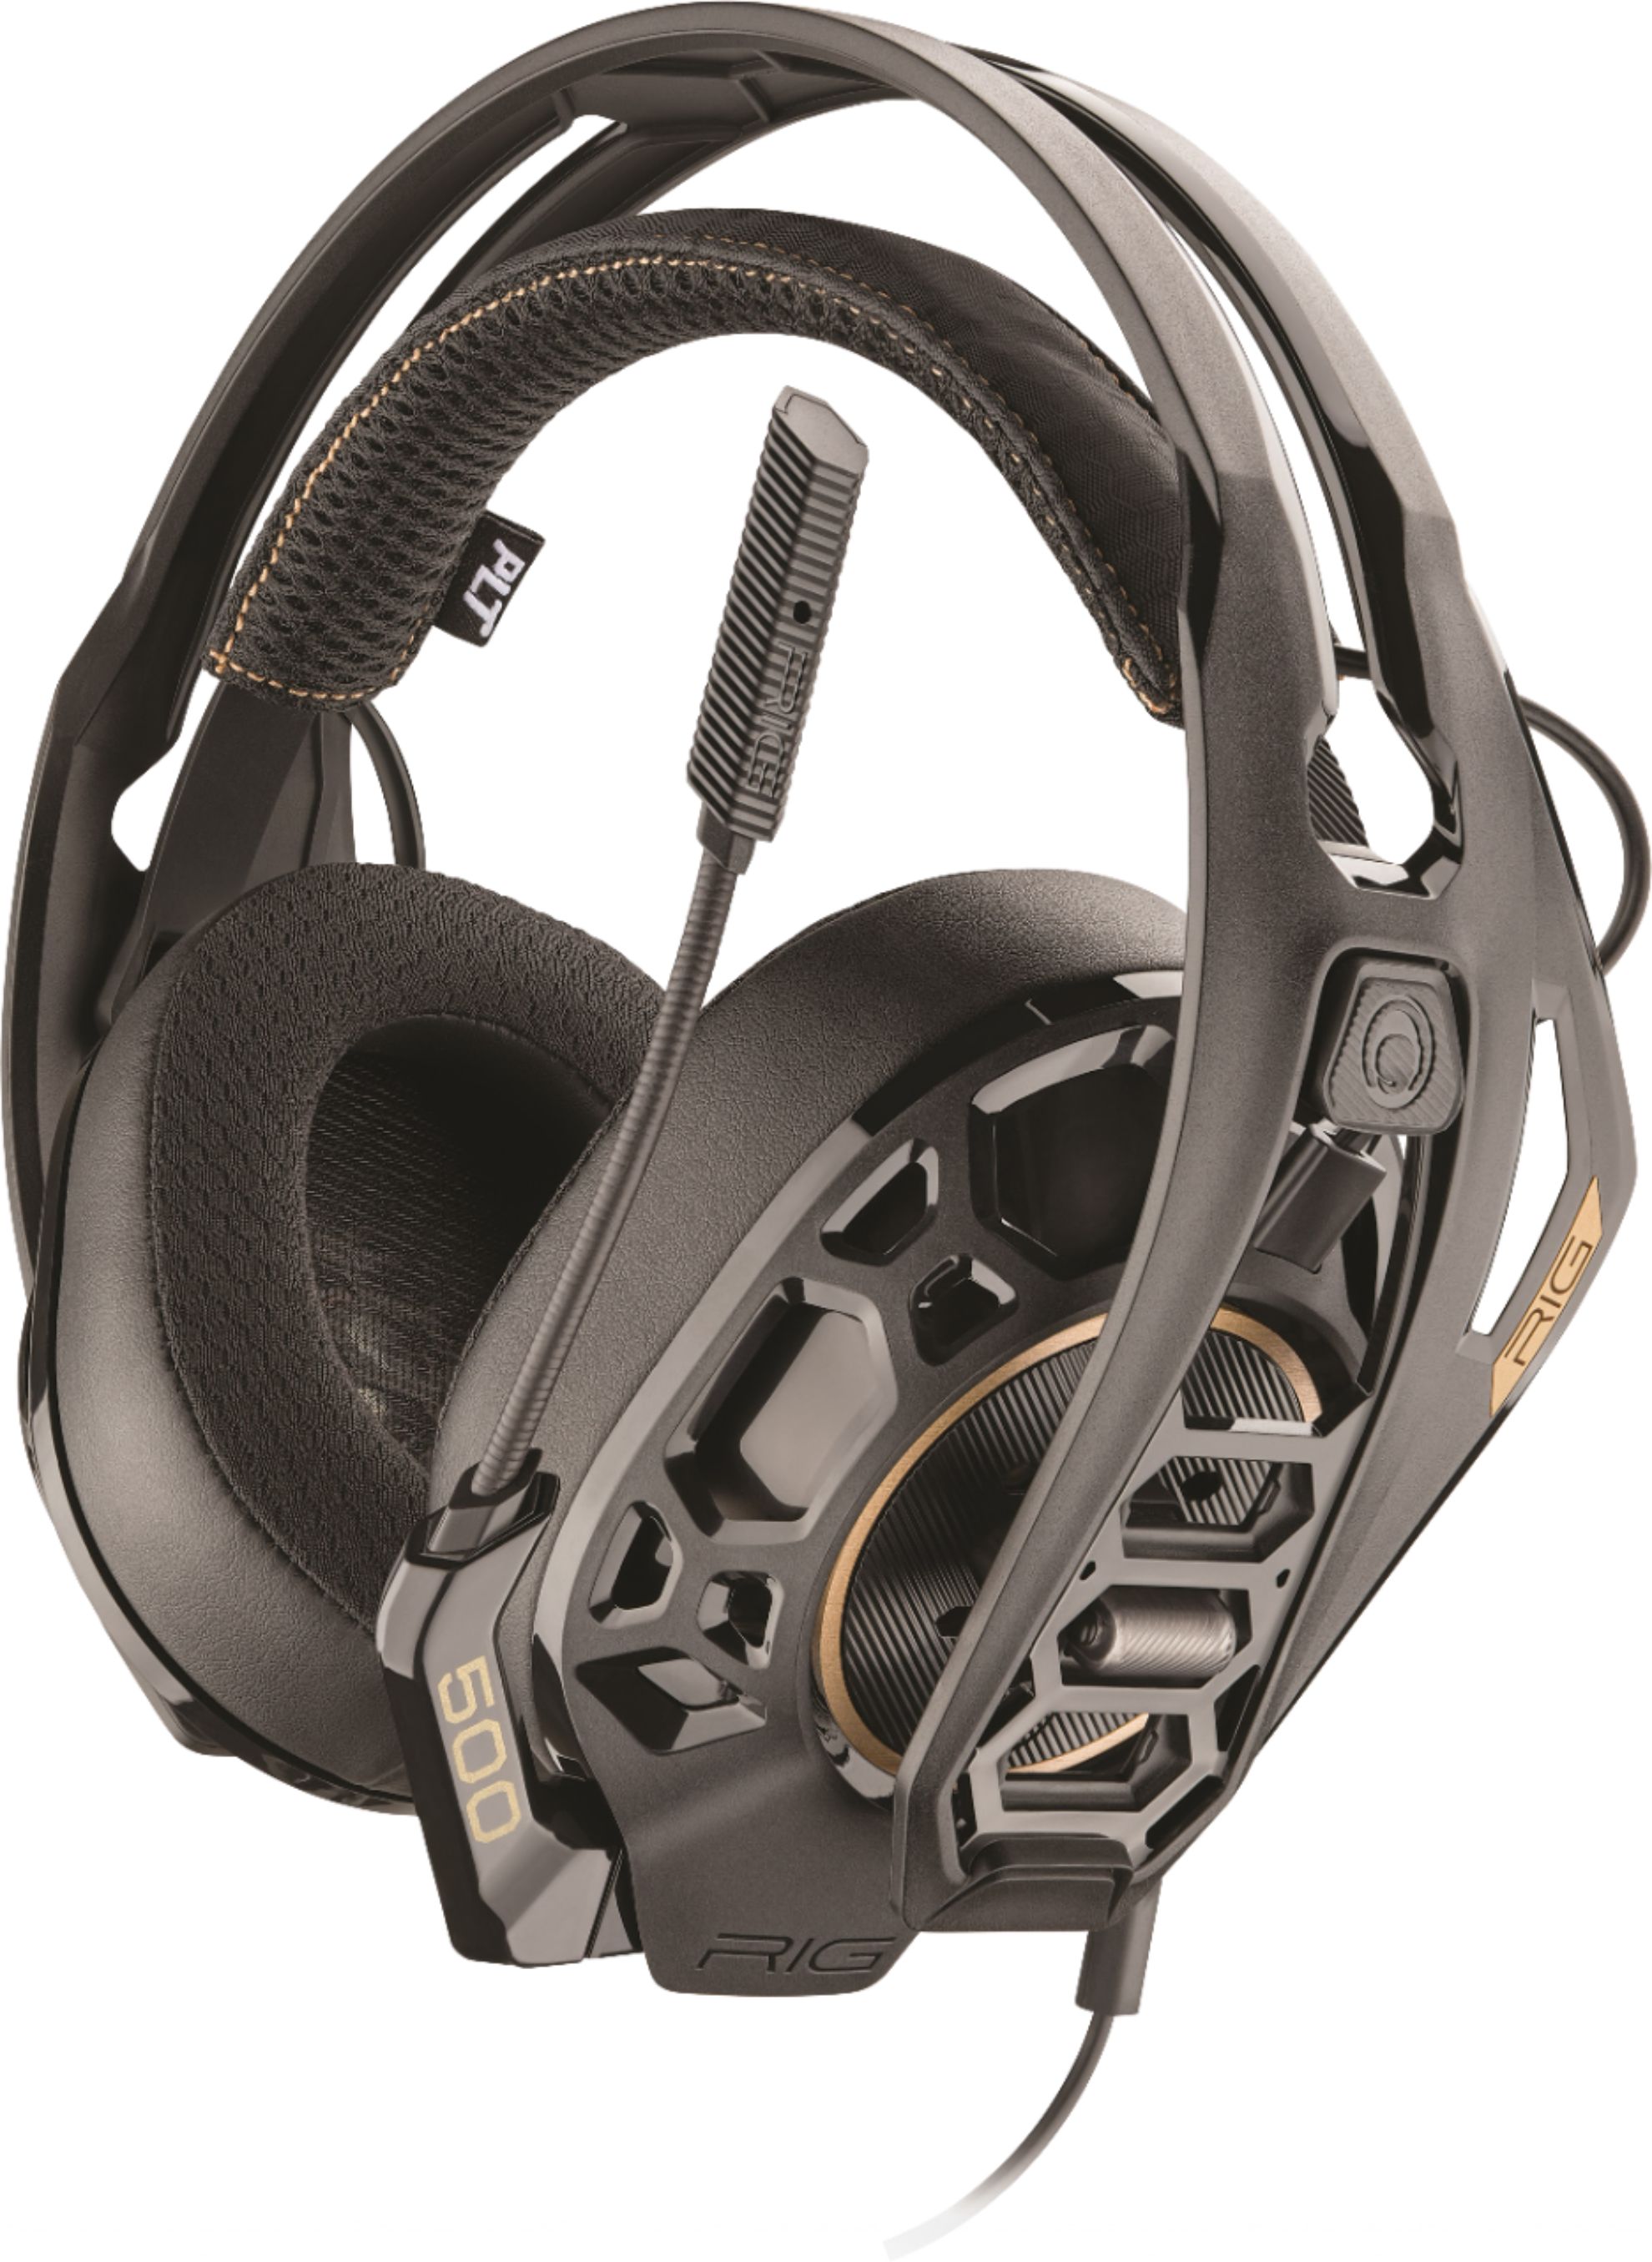 Rig 500 Pro Hs Gaming Headset For Playstation Outlet Online, UP TO 